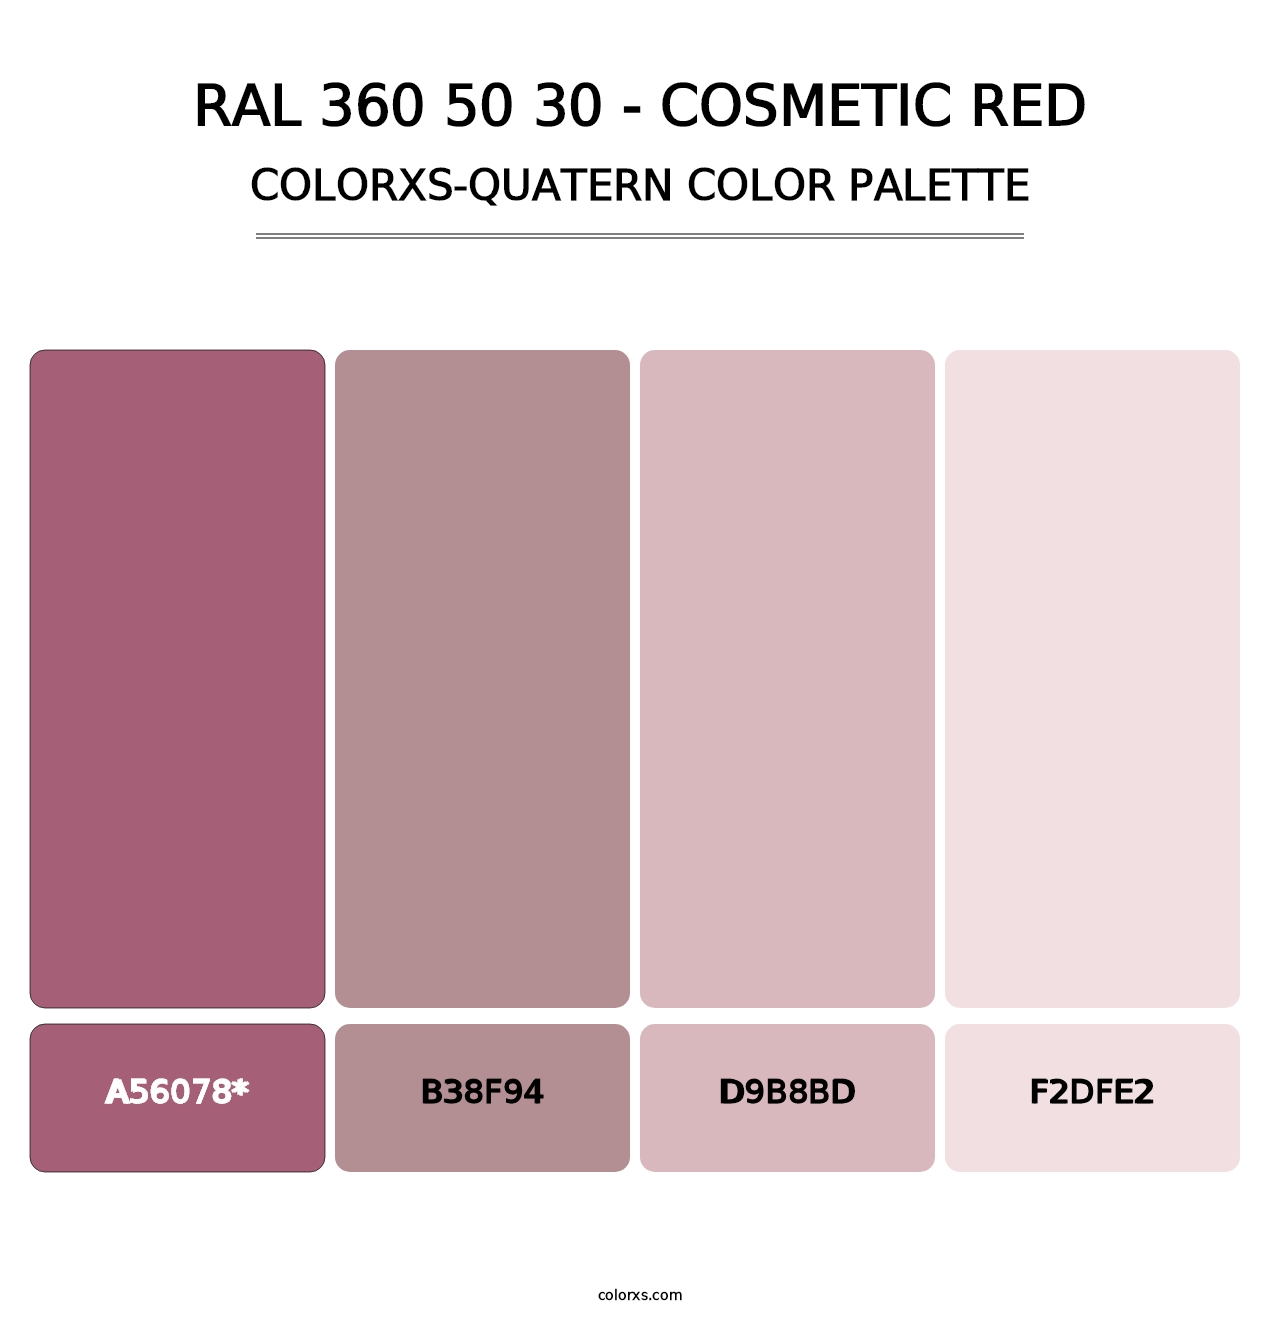 RAL 360 50 30 - Cosmetic Red - Colorxs Quatern Palette